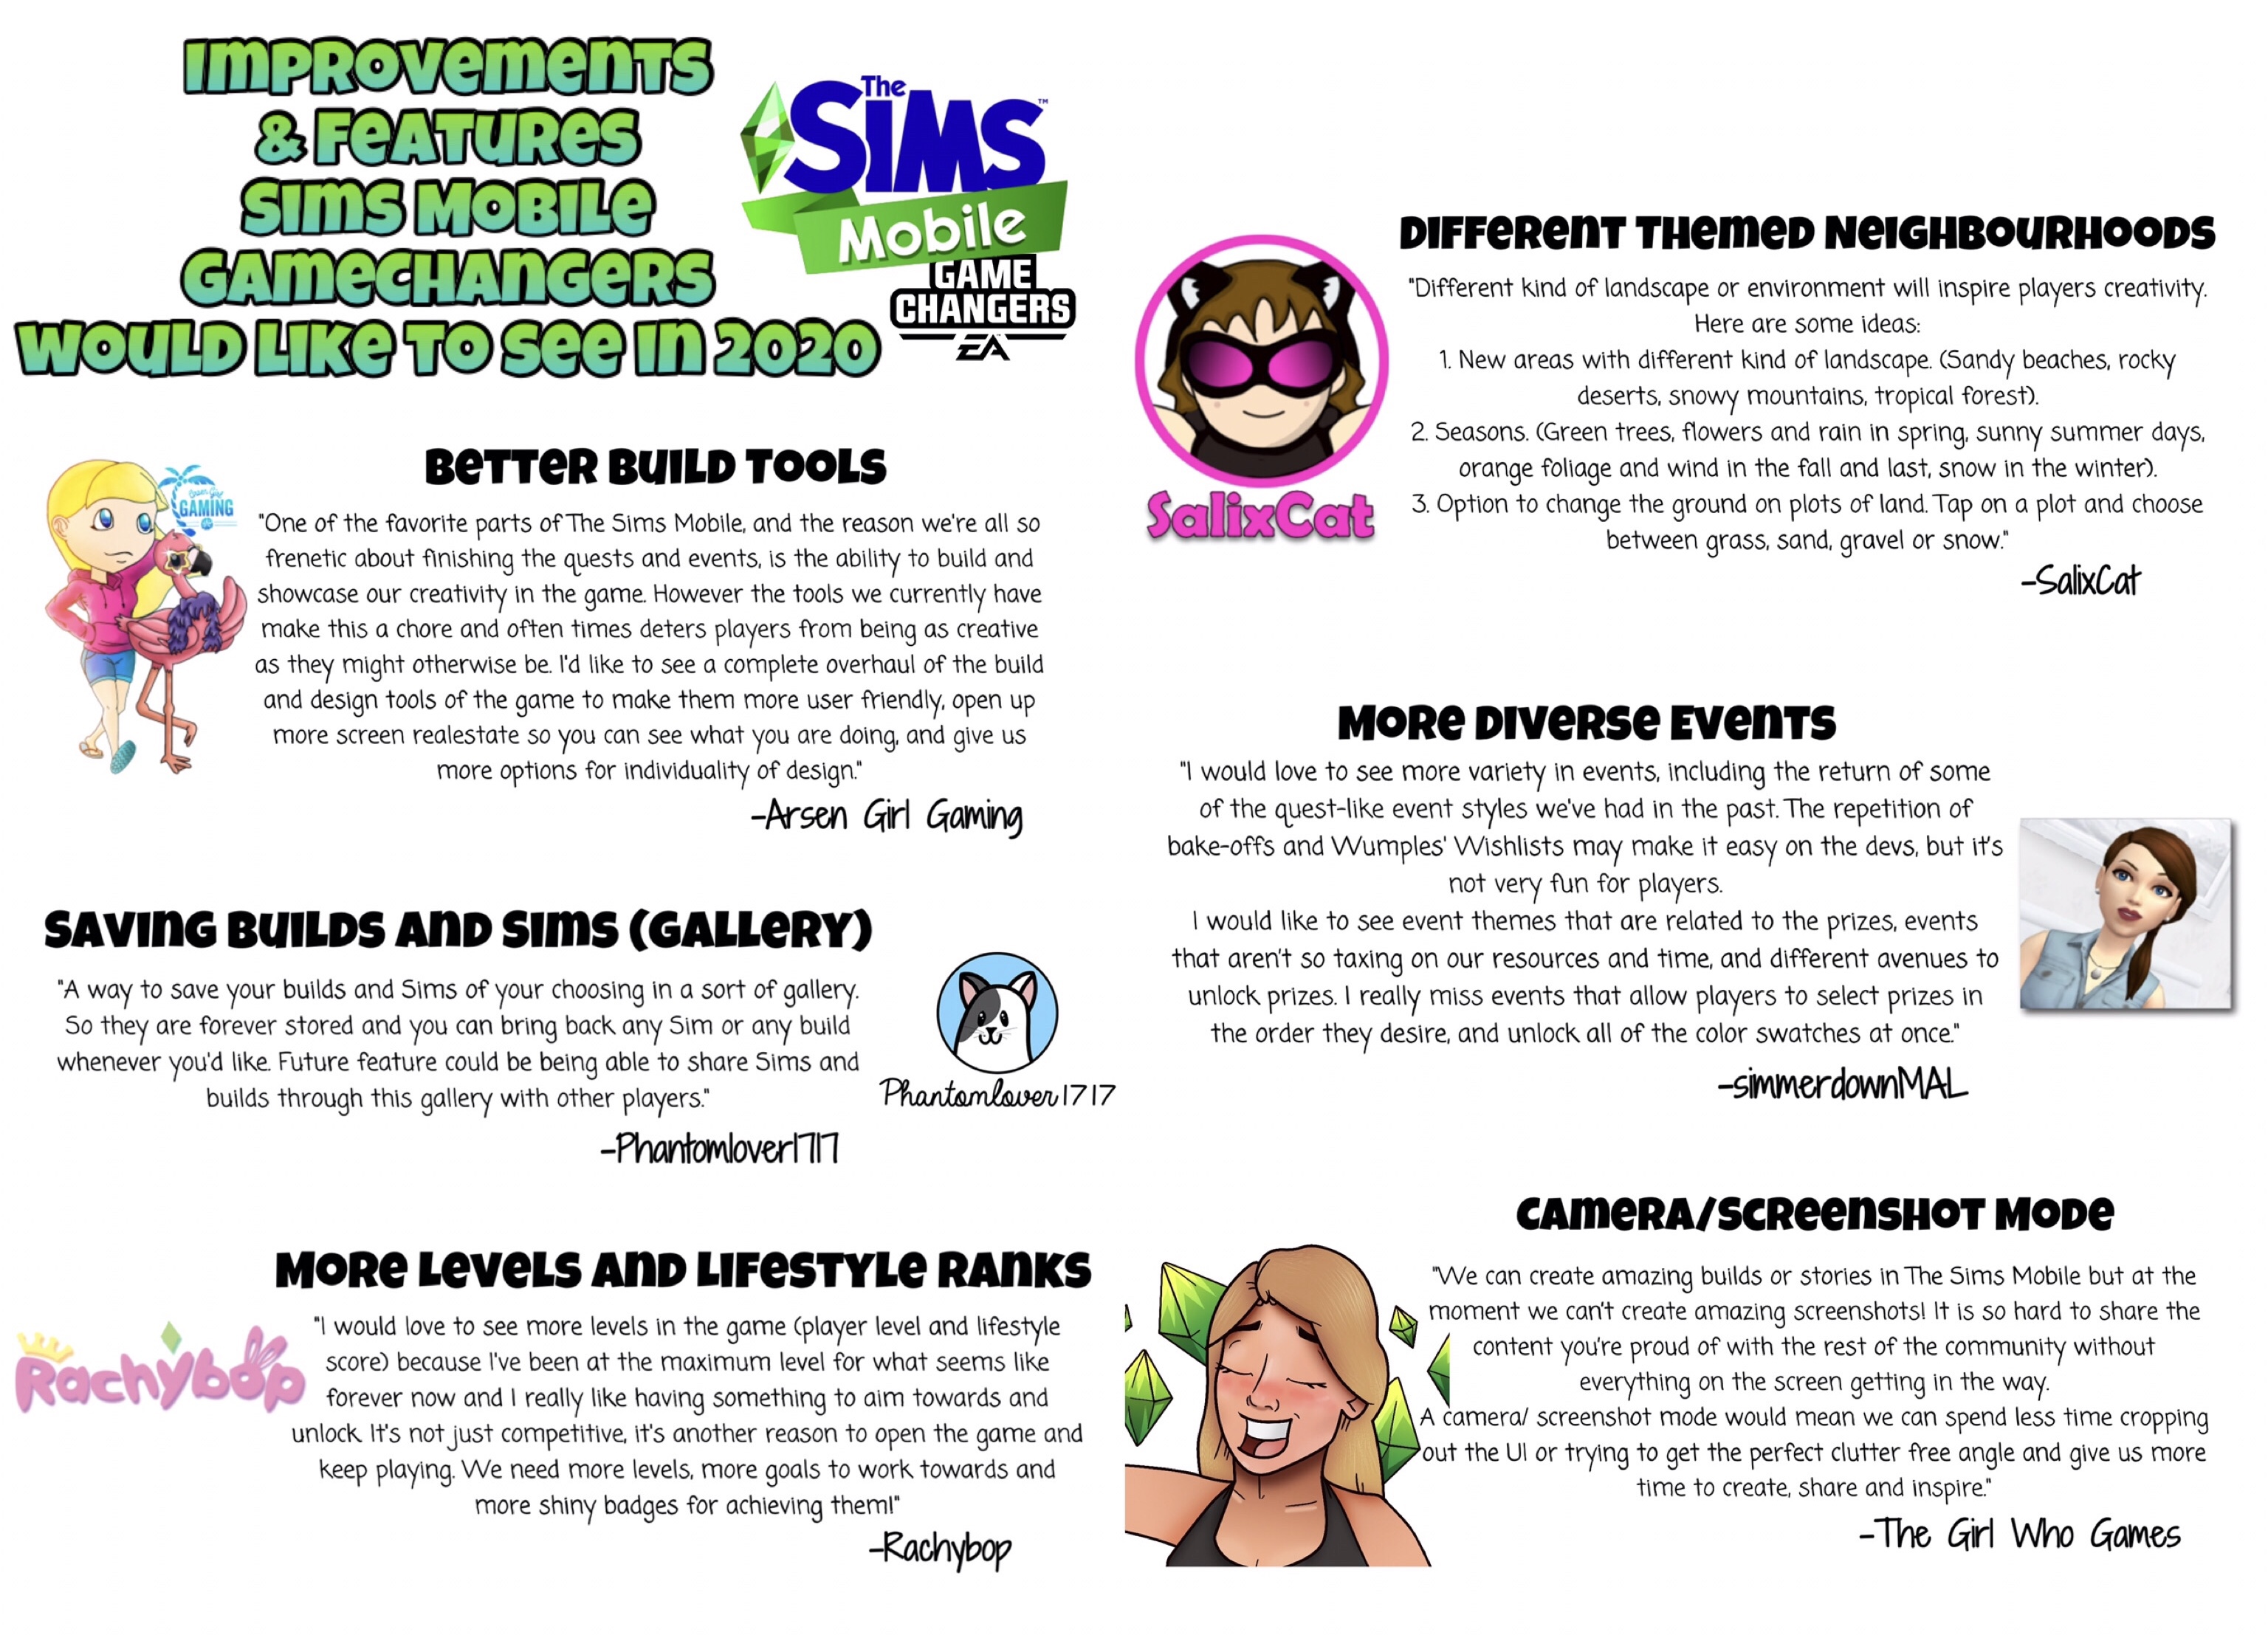 The Sims Mobile: Updated Features + Description